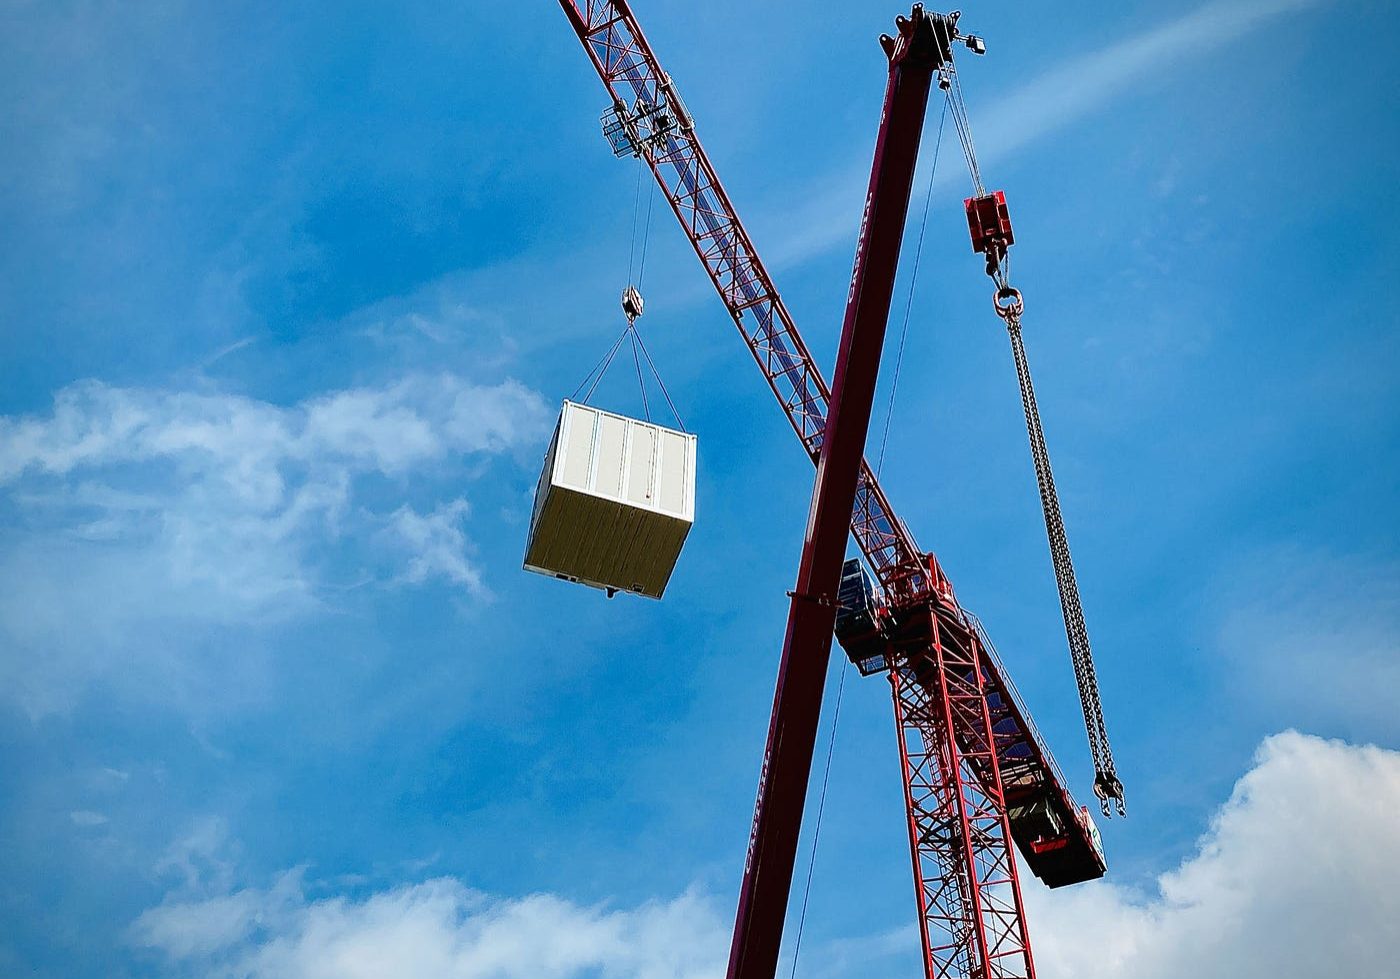 Crane picking up a large container with a blue sky behind it